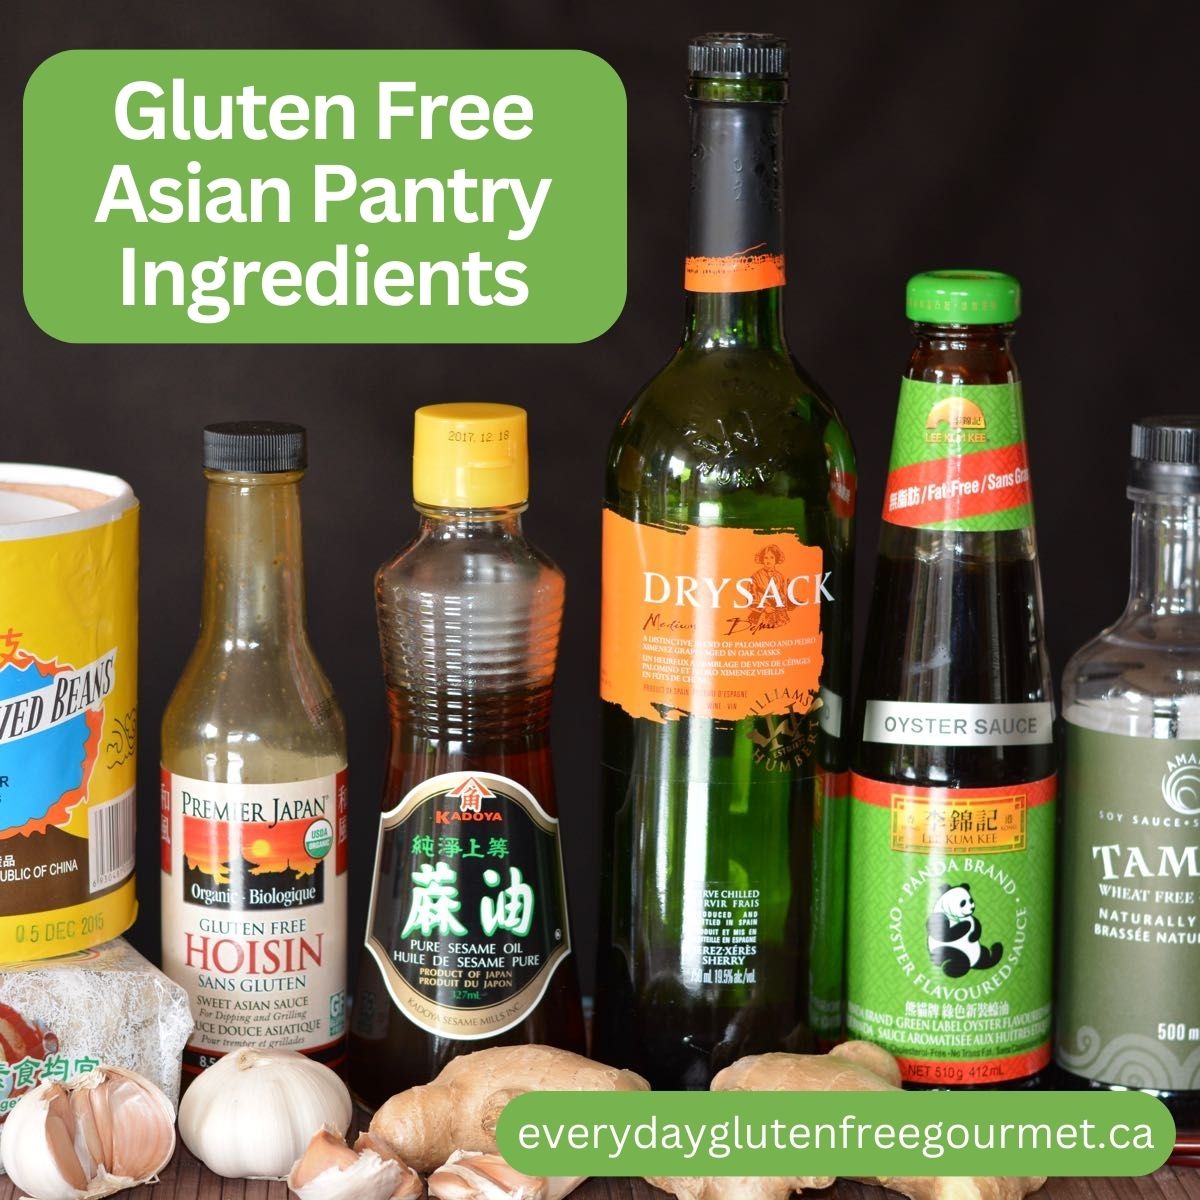 Bottles of Gluten Free Asian Pantry ingredients for Chinese and fusion cooking.